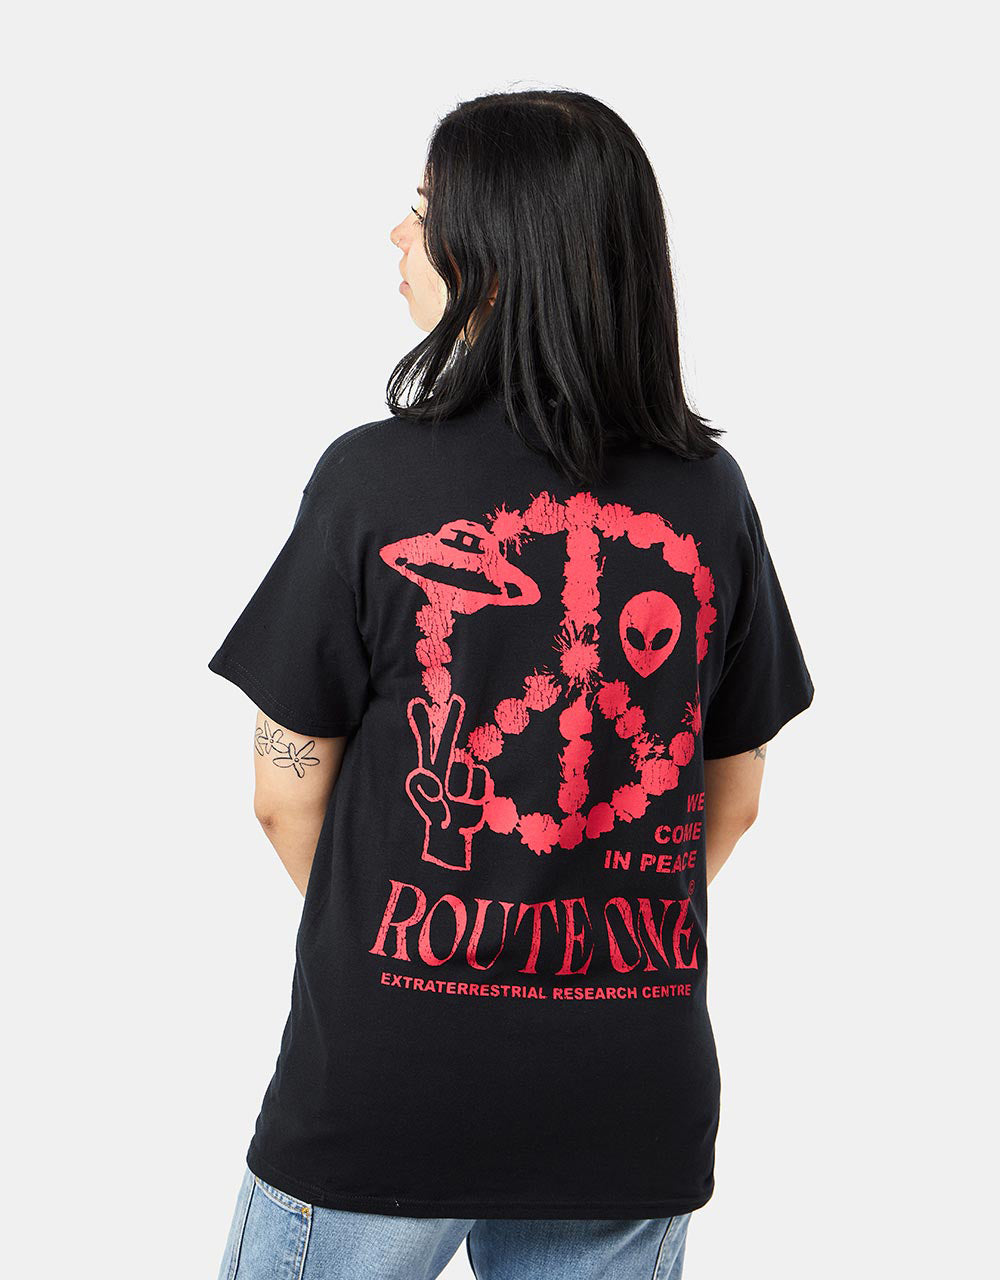 Route One They're Out There T-Shirt - Black